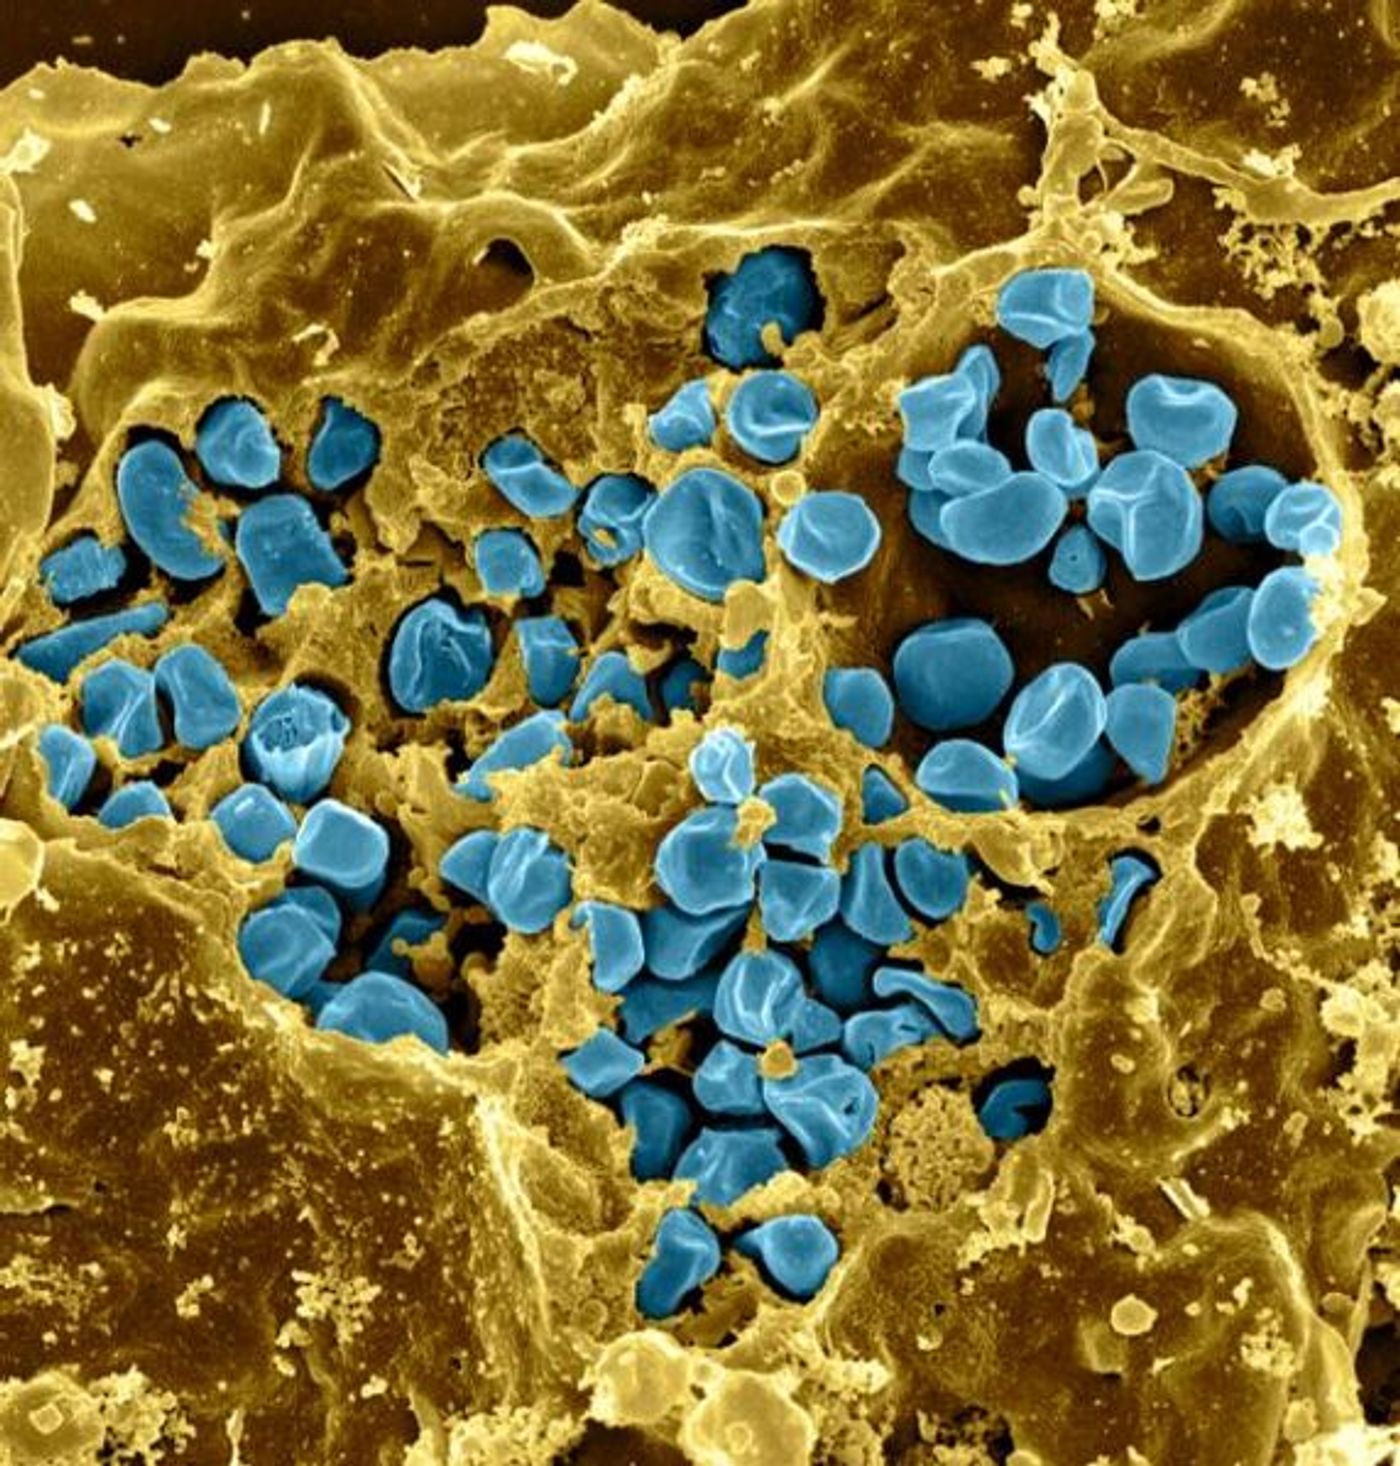 Scanning electron micrograph of a murine macrophage infected with Francisella tularensis strain LVS. Macrophages were dry-fractured by touching the cell surface with cellophane tape after critical point drying to reveal intracellular bacteria. Bacteria (colorized in blue) are located either in the cytosol or within a membrane-bound vacuole. / Credit: NIAID